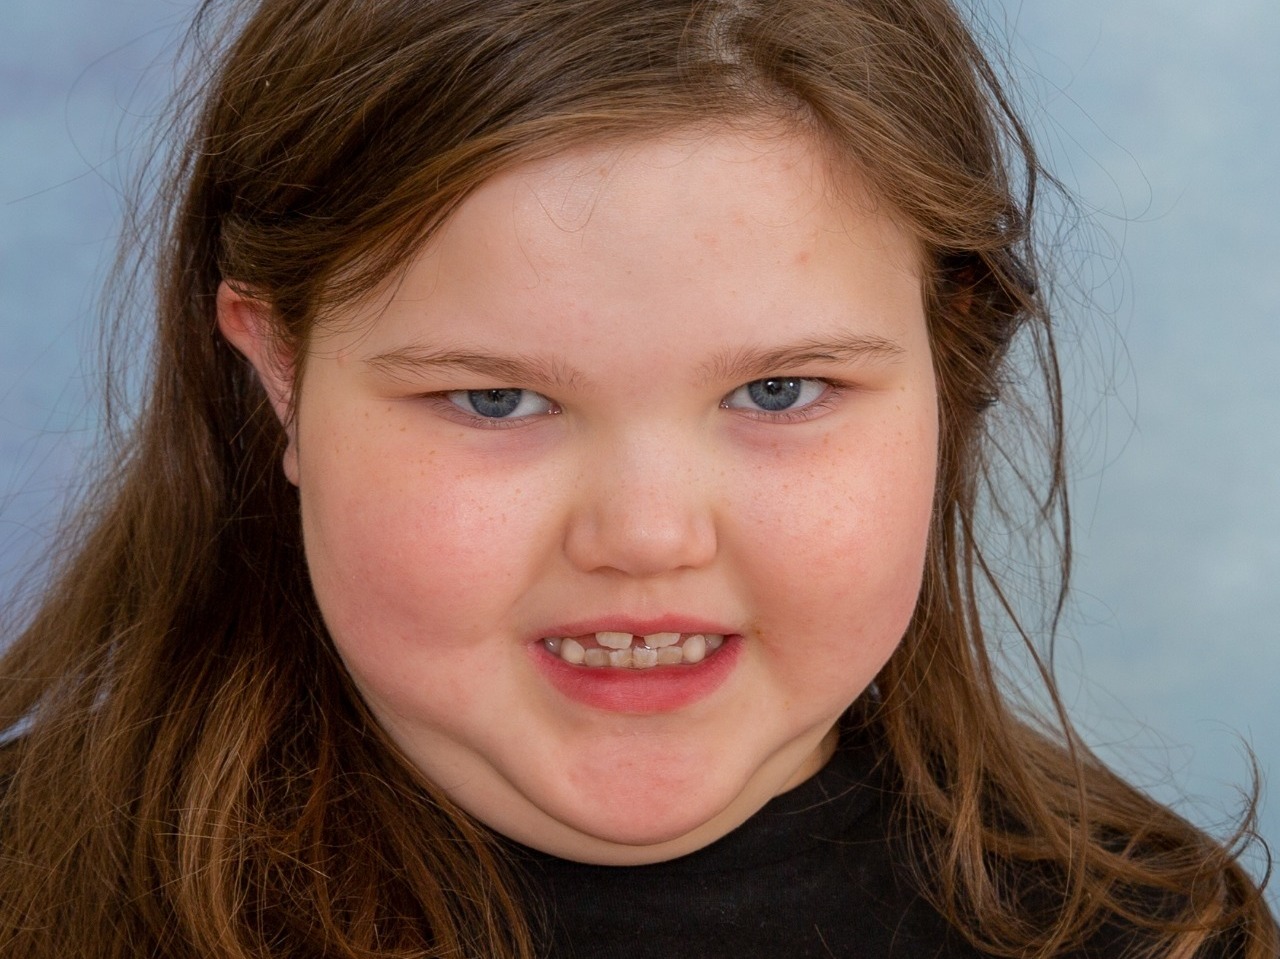 Gorgeous young lady having her autistic friendly photo session at school